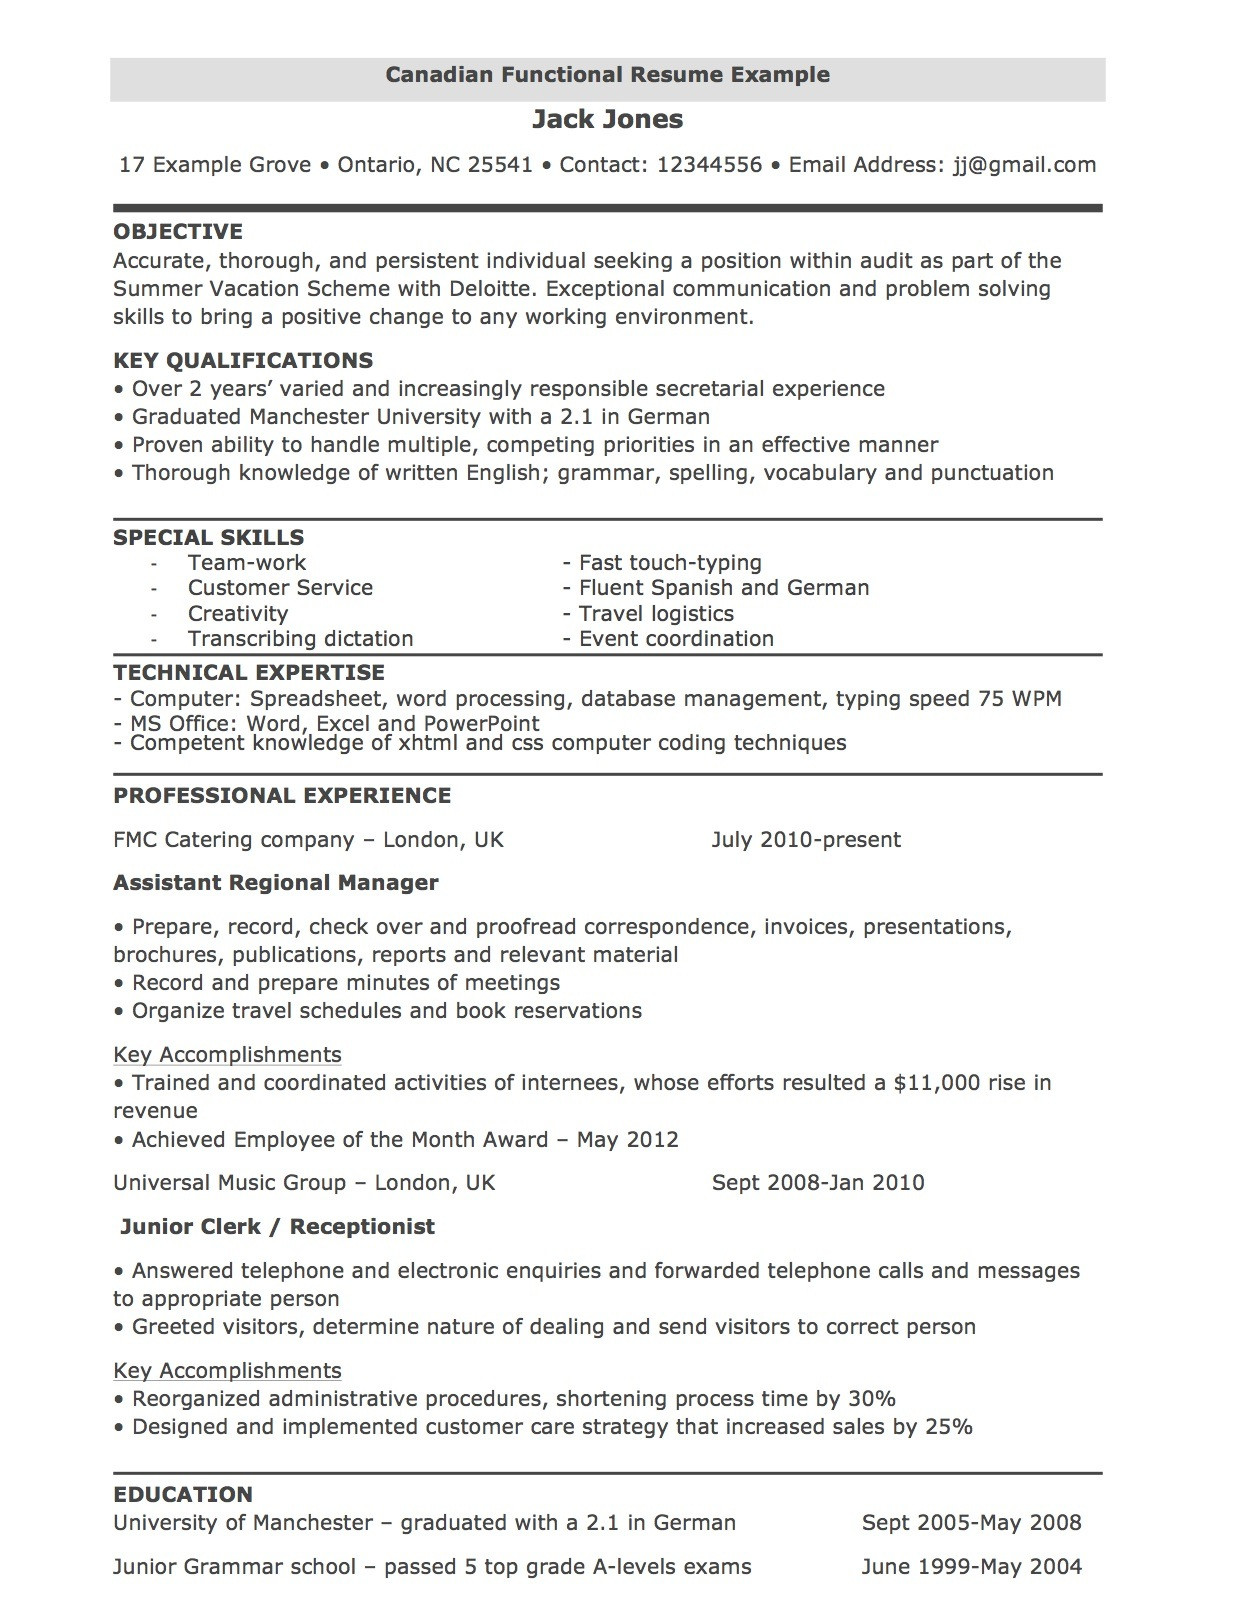 Resume Samples Canada for It Professionals Templates and Examples – Joblers